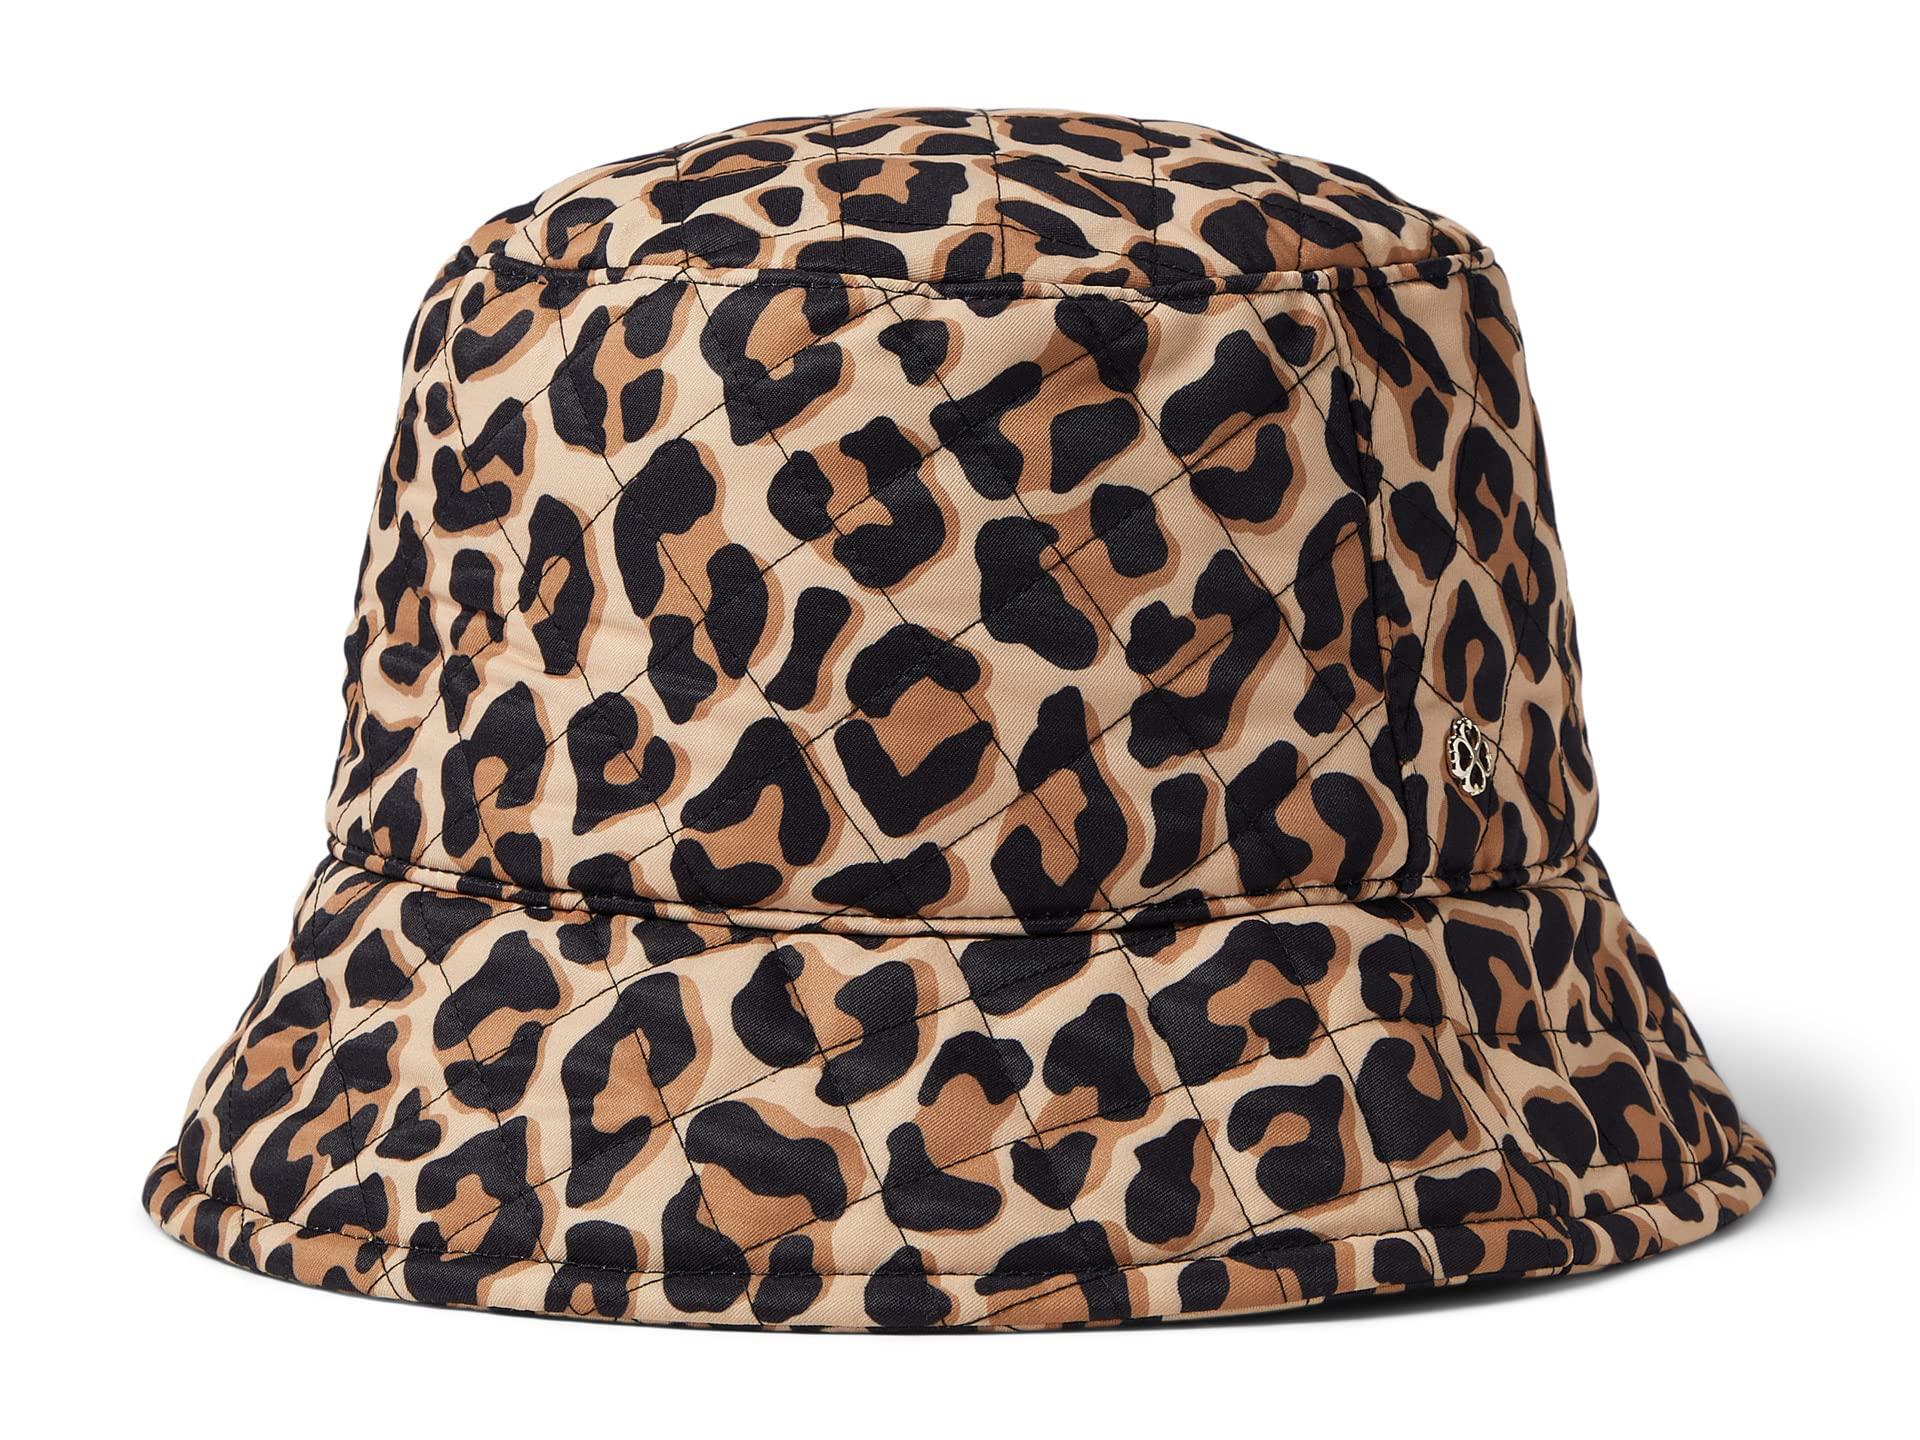 Kate Spade Lovely Leopard Quilted Nylon Bucket Hat in Black | Lyst